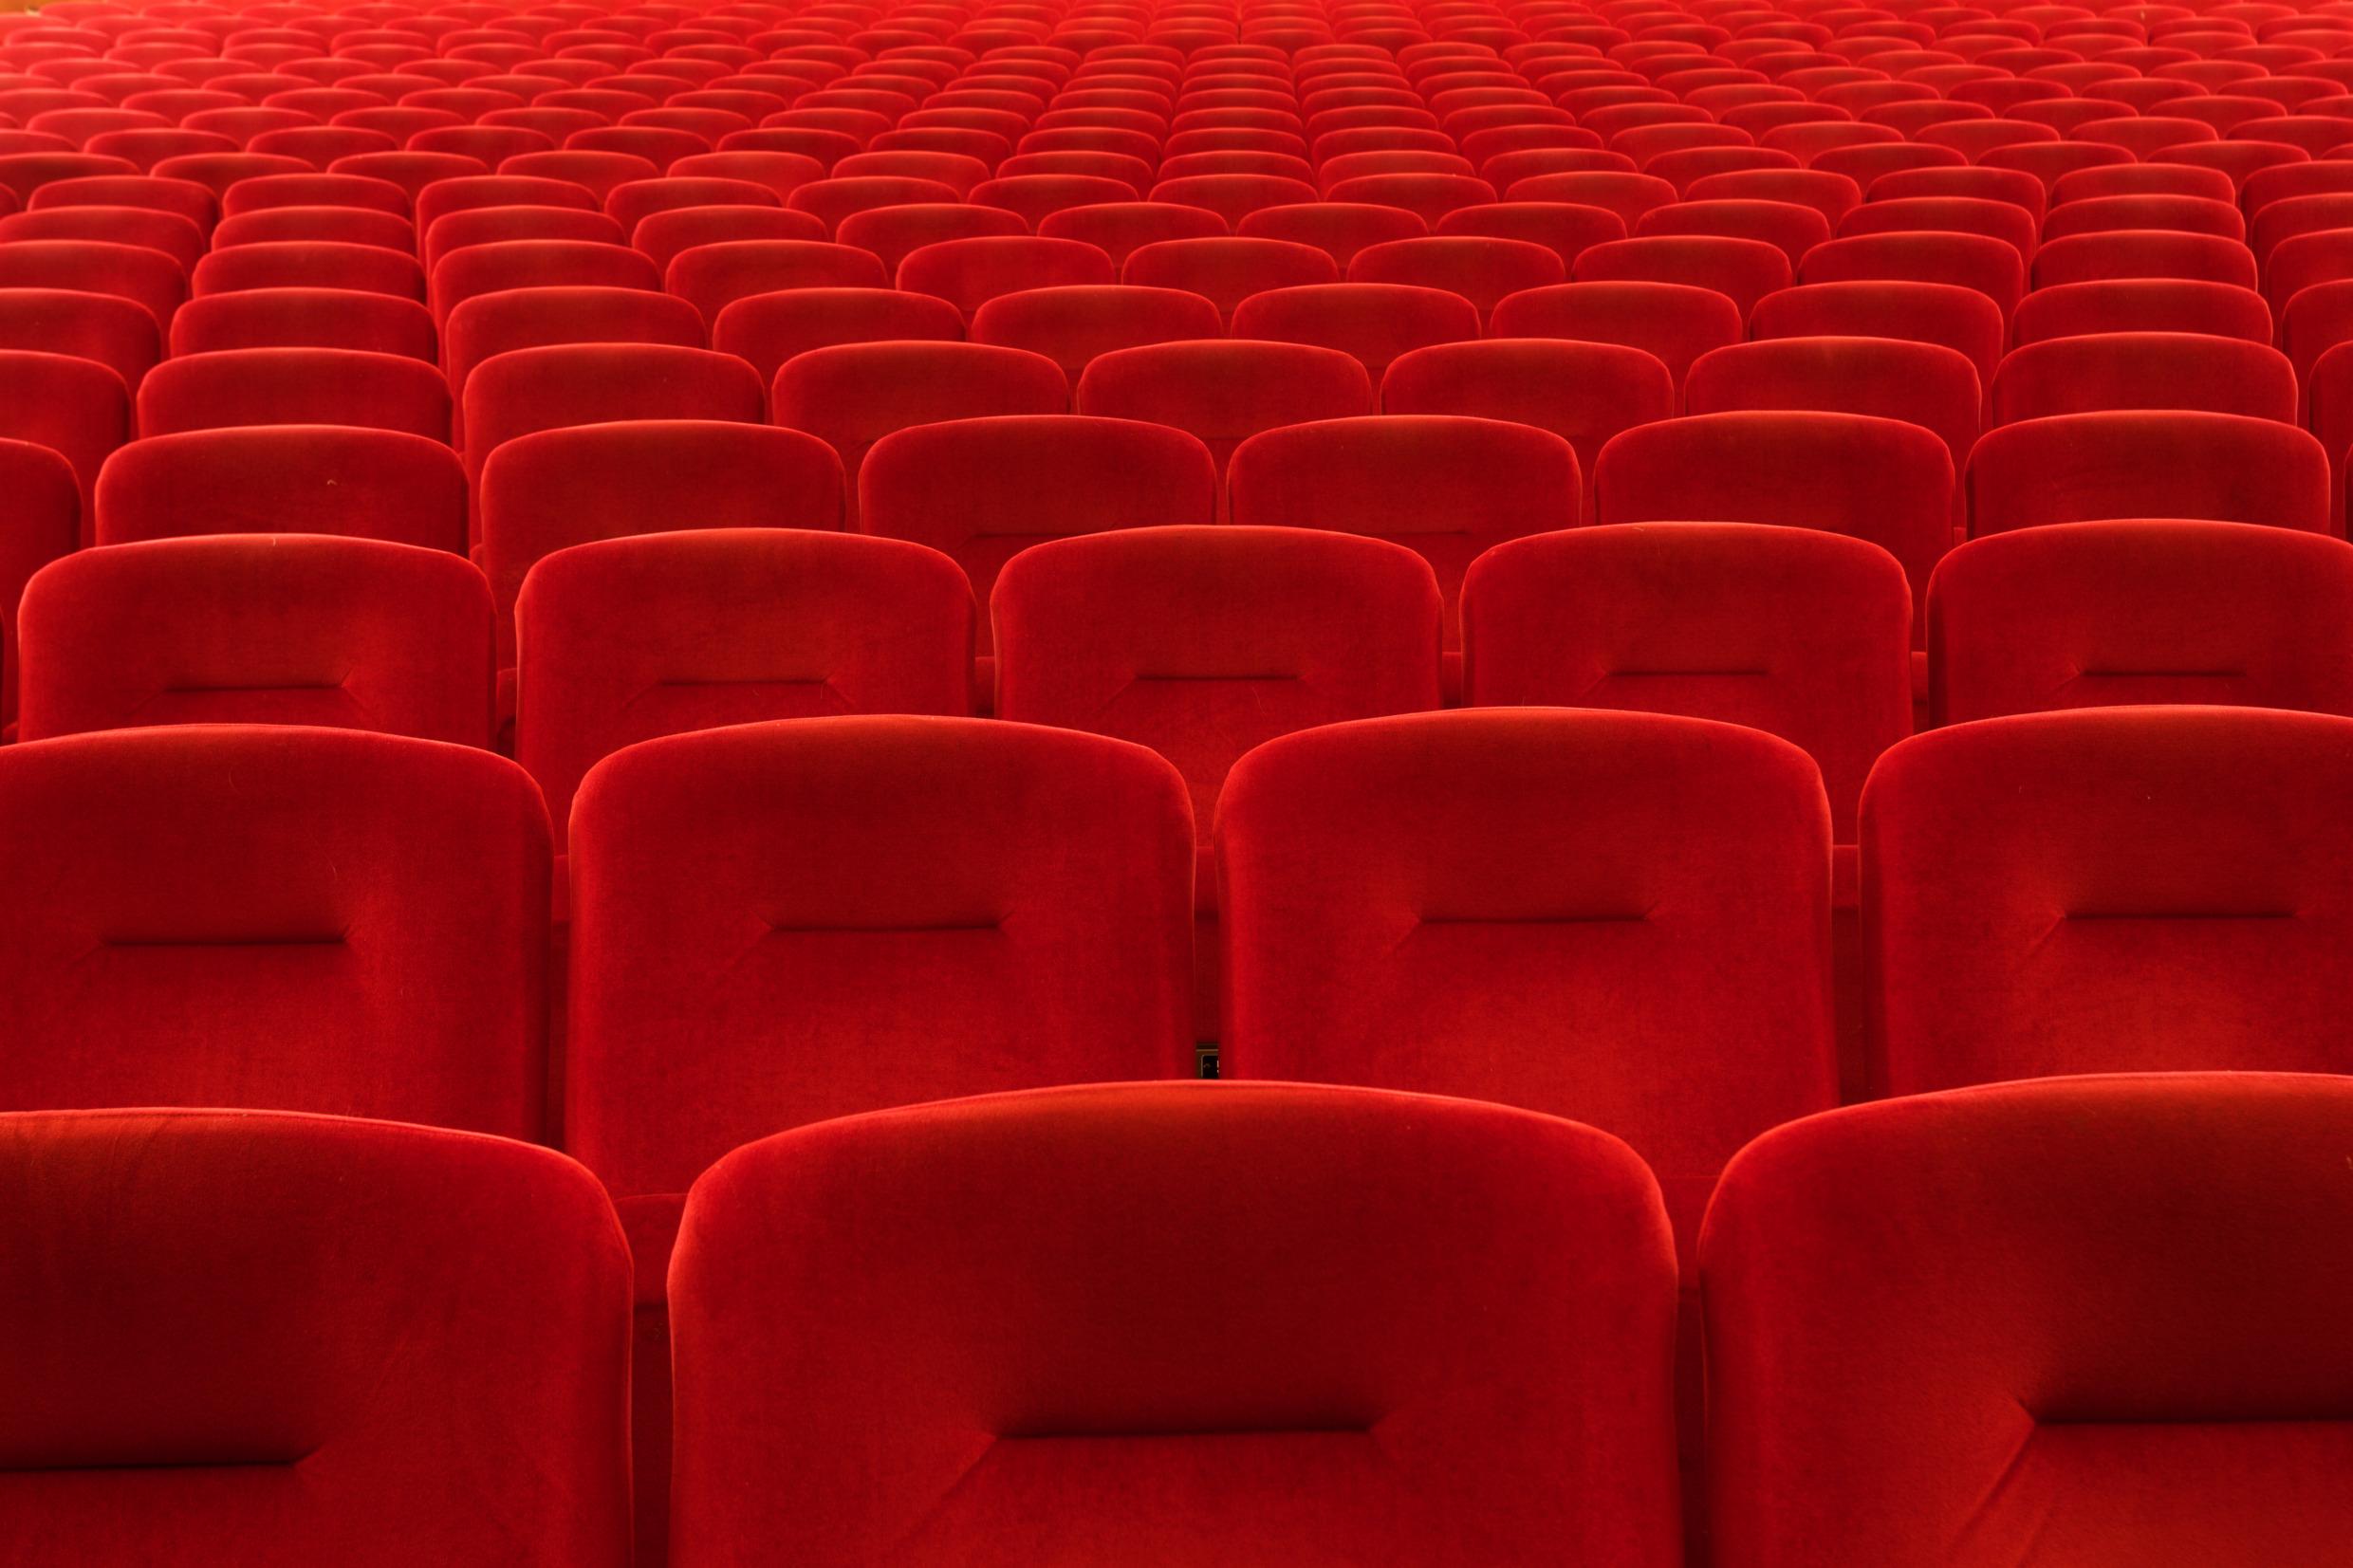 Classic red seats in an older movie theatre.